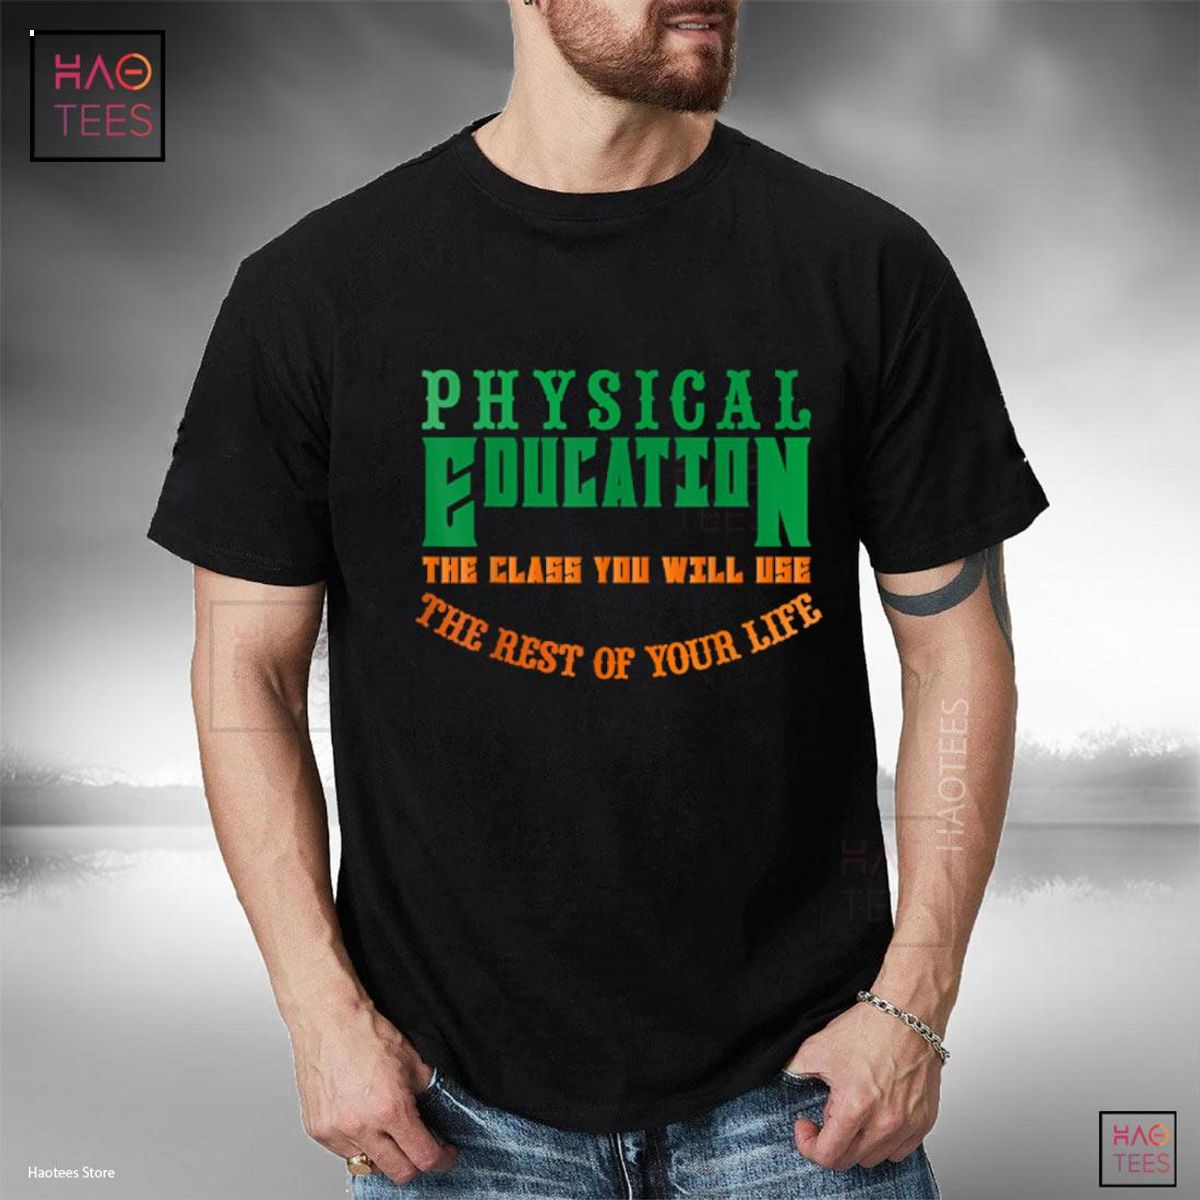 Physical Education The Rest of Your Life Shirt